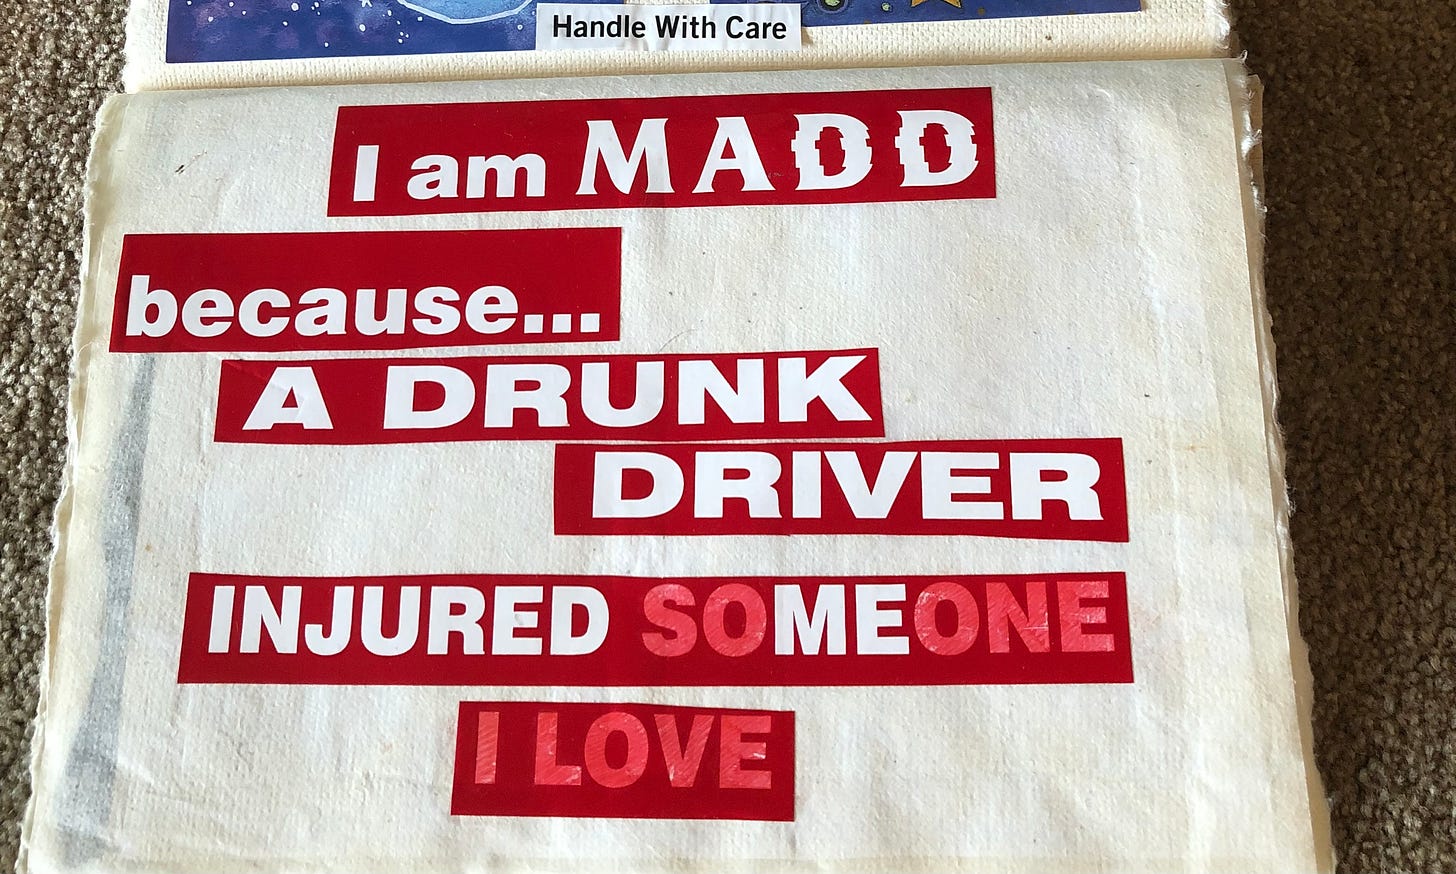 A red and white bumper sticker has been cut up to fit in a scrap book. The word "mad" has been spelled with that double D of Mothers Against Drunk Driving. It says: "I am MADD because a Drunk Driver injured someone I love." The words "someone I love" have been colored in a paler red so you can still read it as-is, but ME stands out in white. 